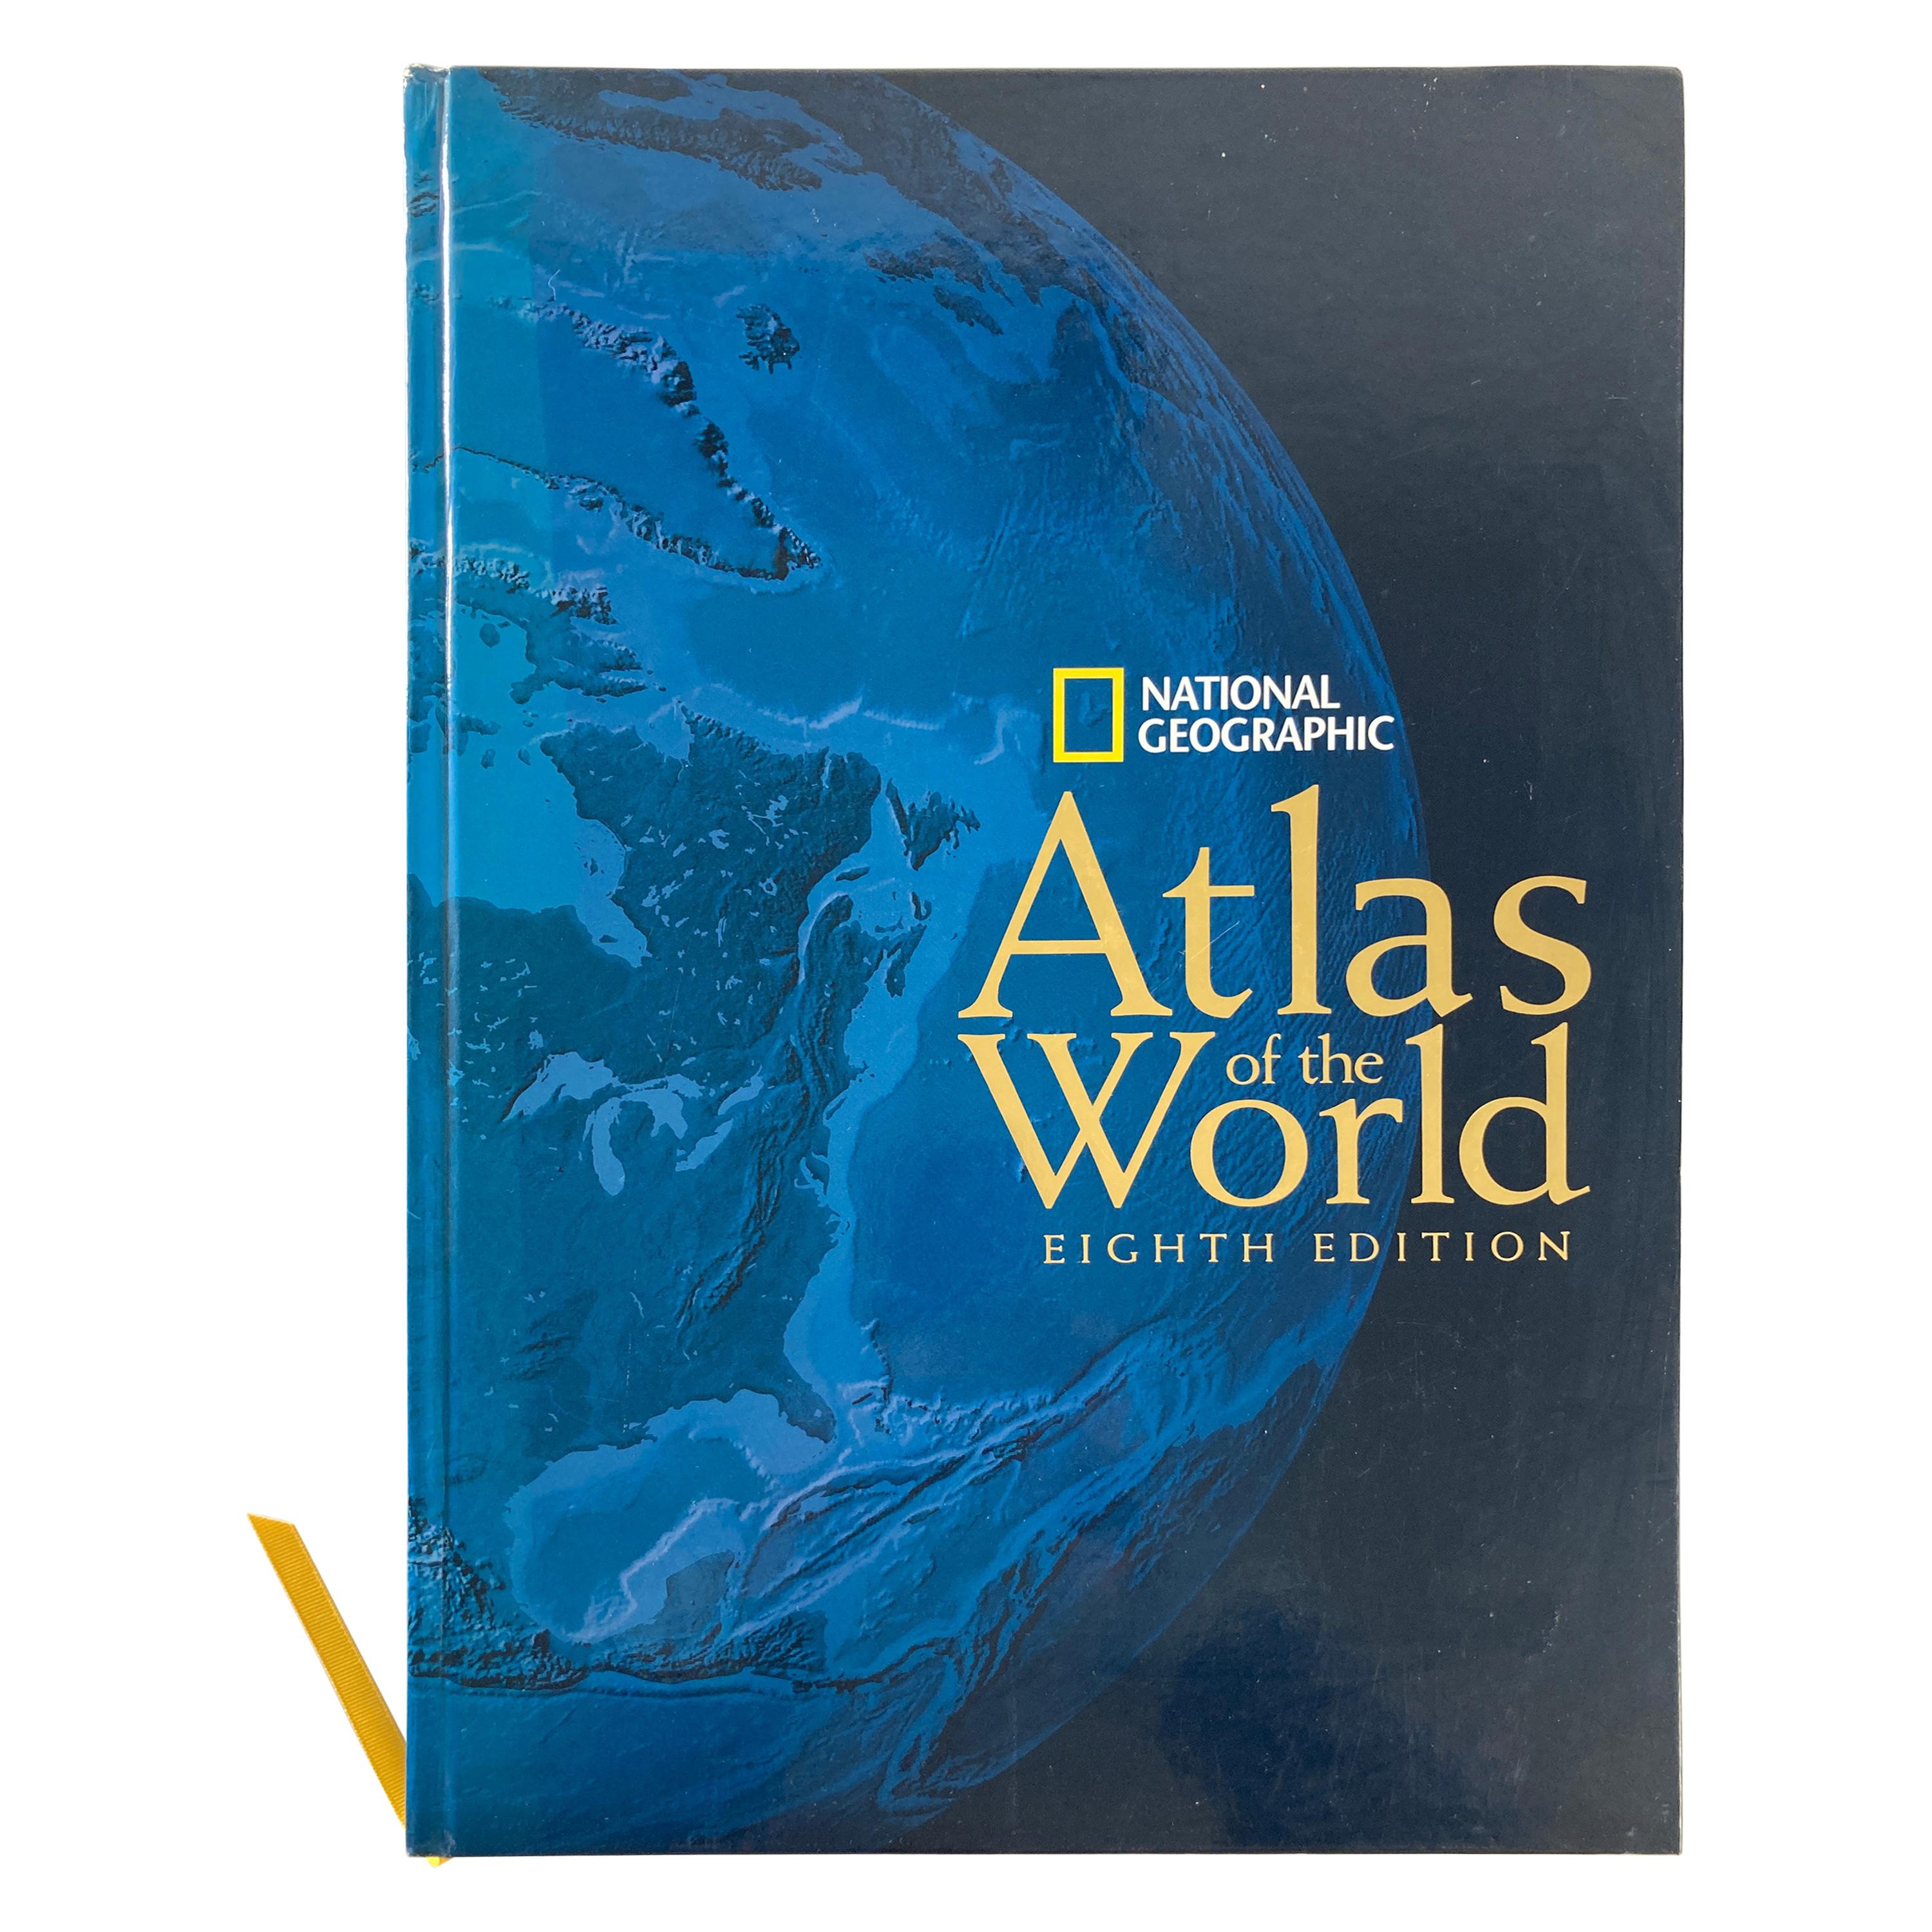 National Geographic Atlas of the World, Eighth Edition Hardcover Book For Sale